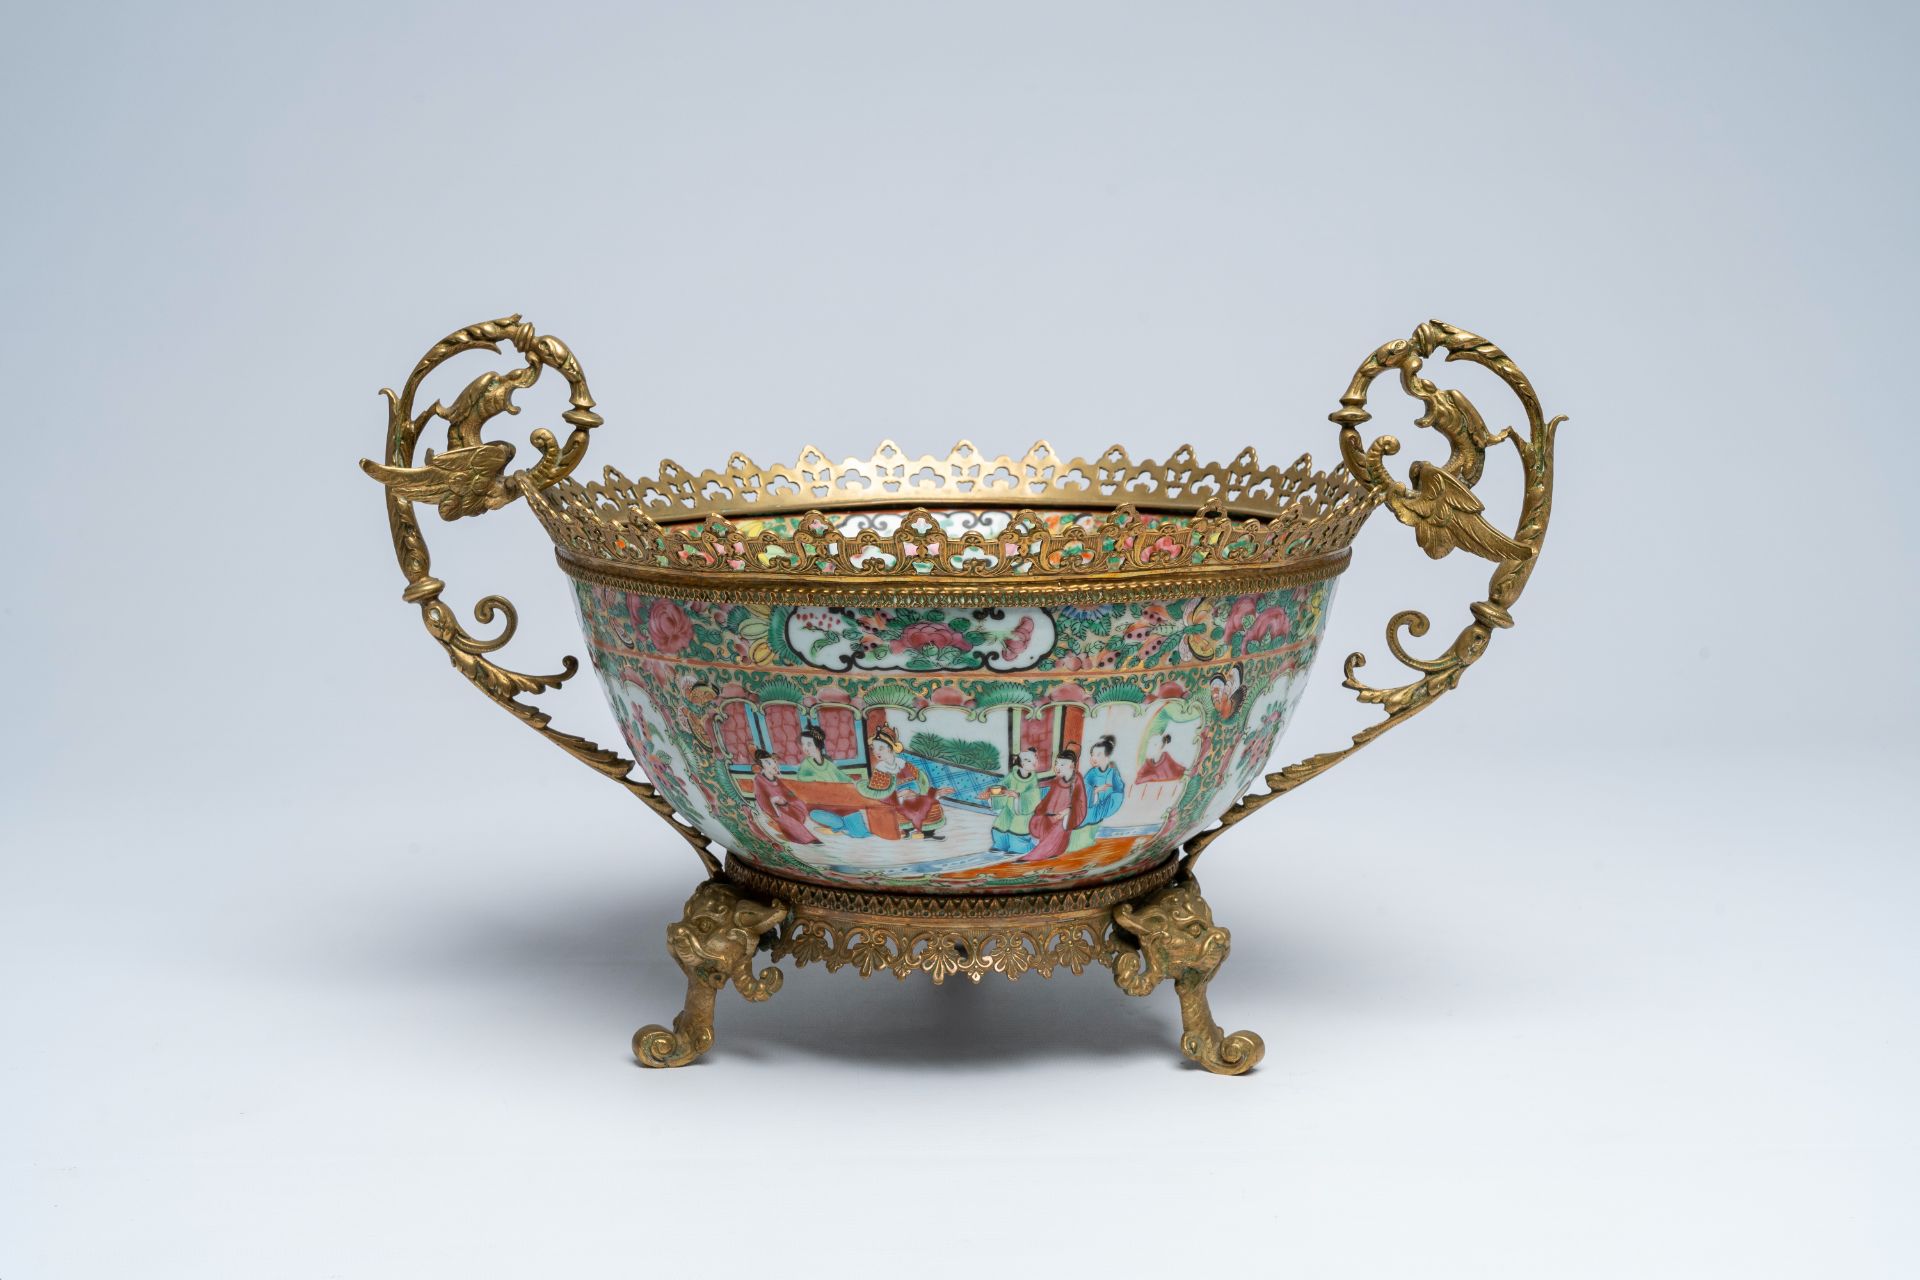 A Chinese Canton famille rose brass mounted bowl with palace scenes and floral design, 19th C.